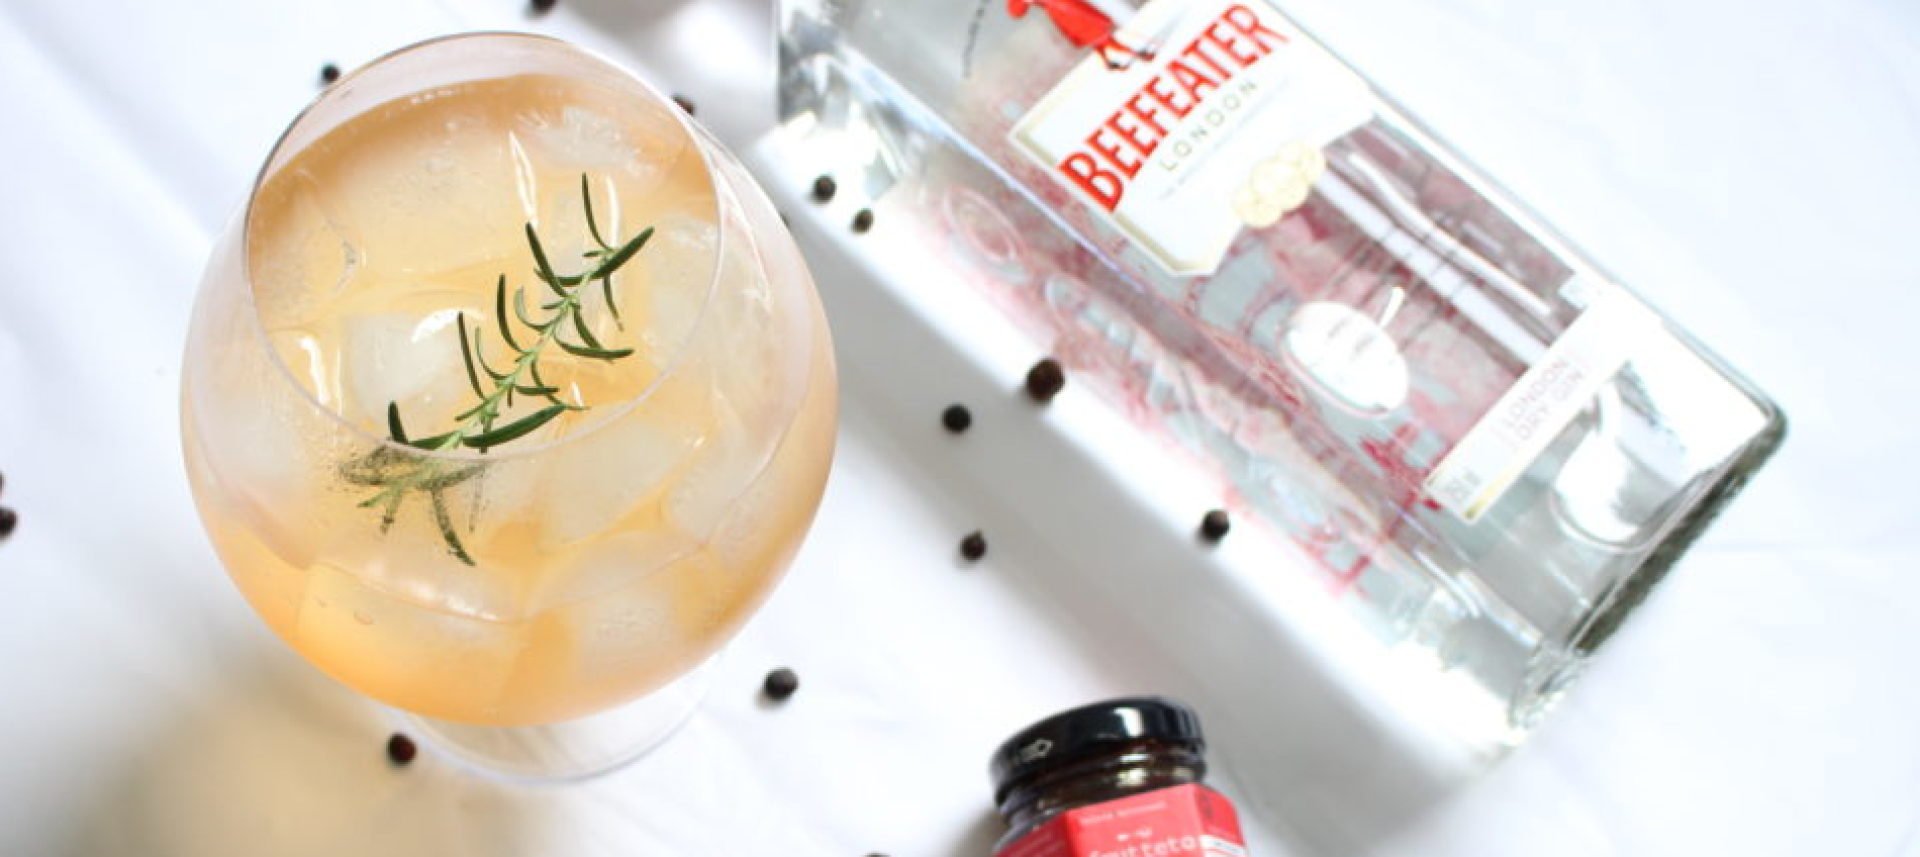 beefeater london dry gin and Lemon-Ginger Jam and Tonic cocktail